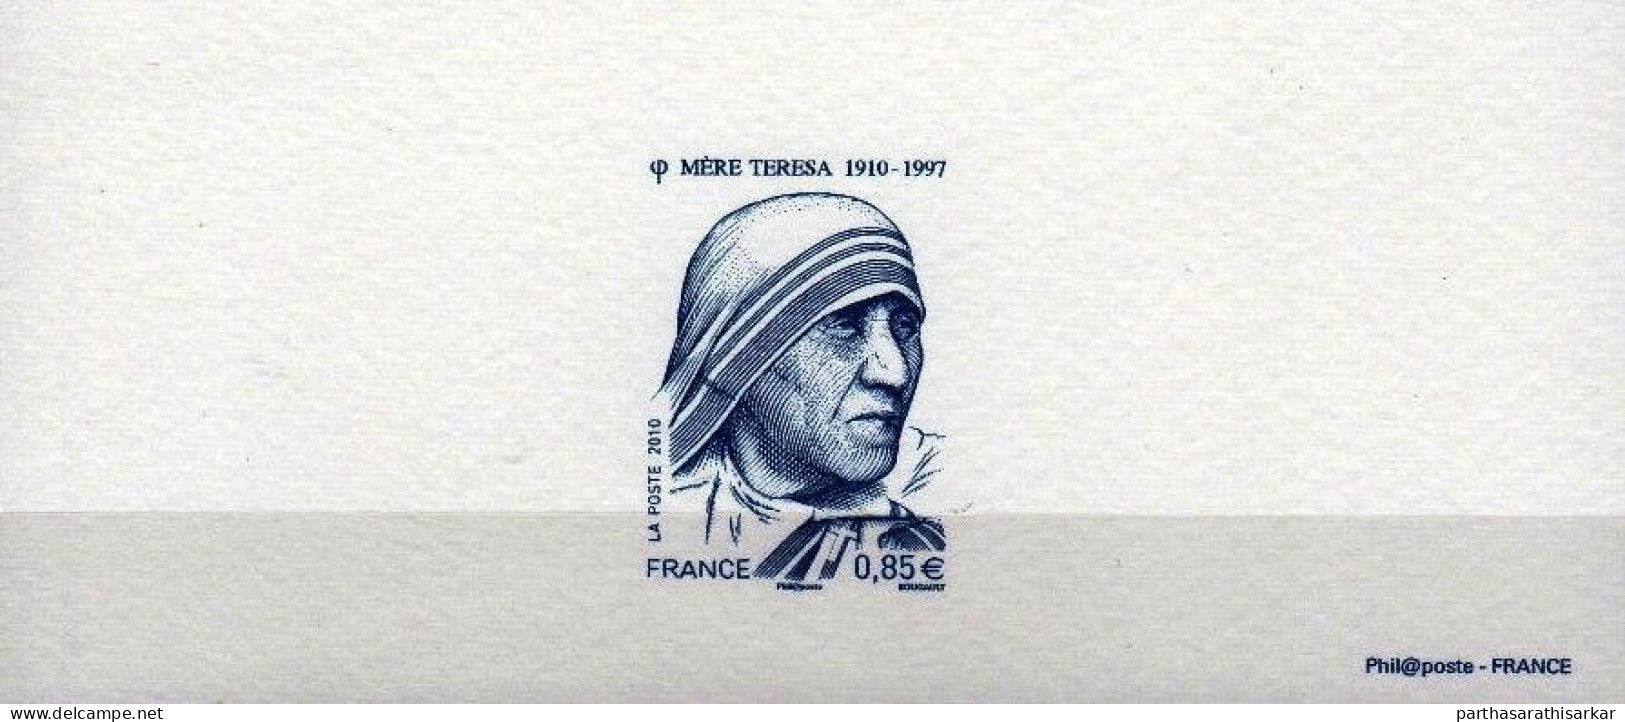 FRANCE 2010 100TH BIRTH ANNIVERSARY OF MOTHER TERESA 1910-1997 OFFICIAL DIE PROOF RARE - Mother Teresa